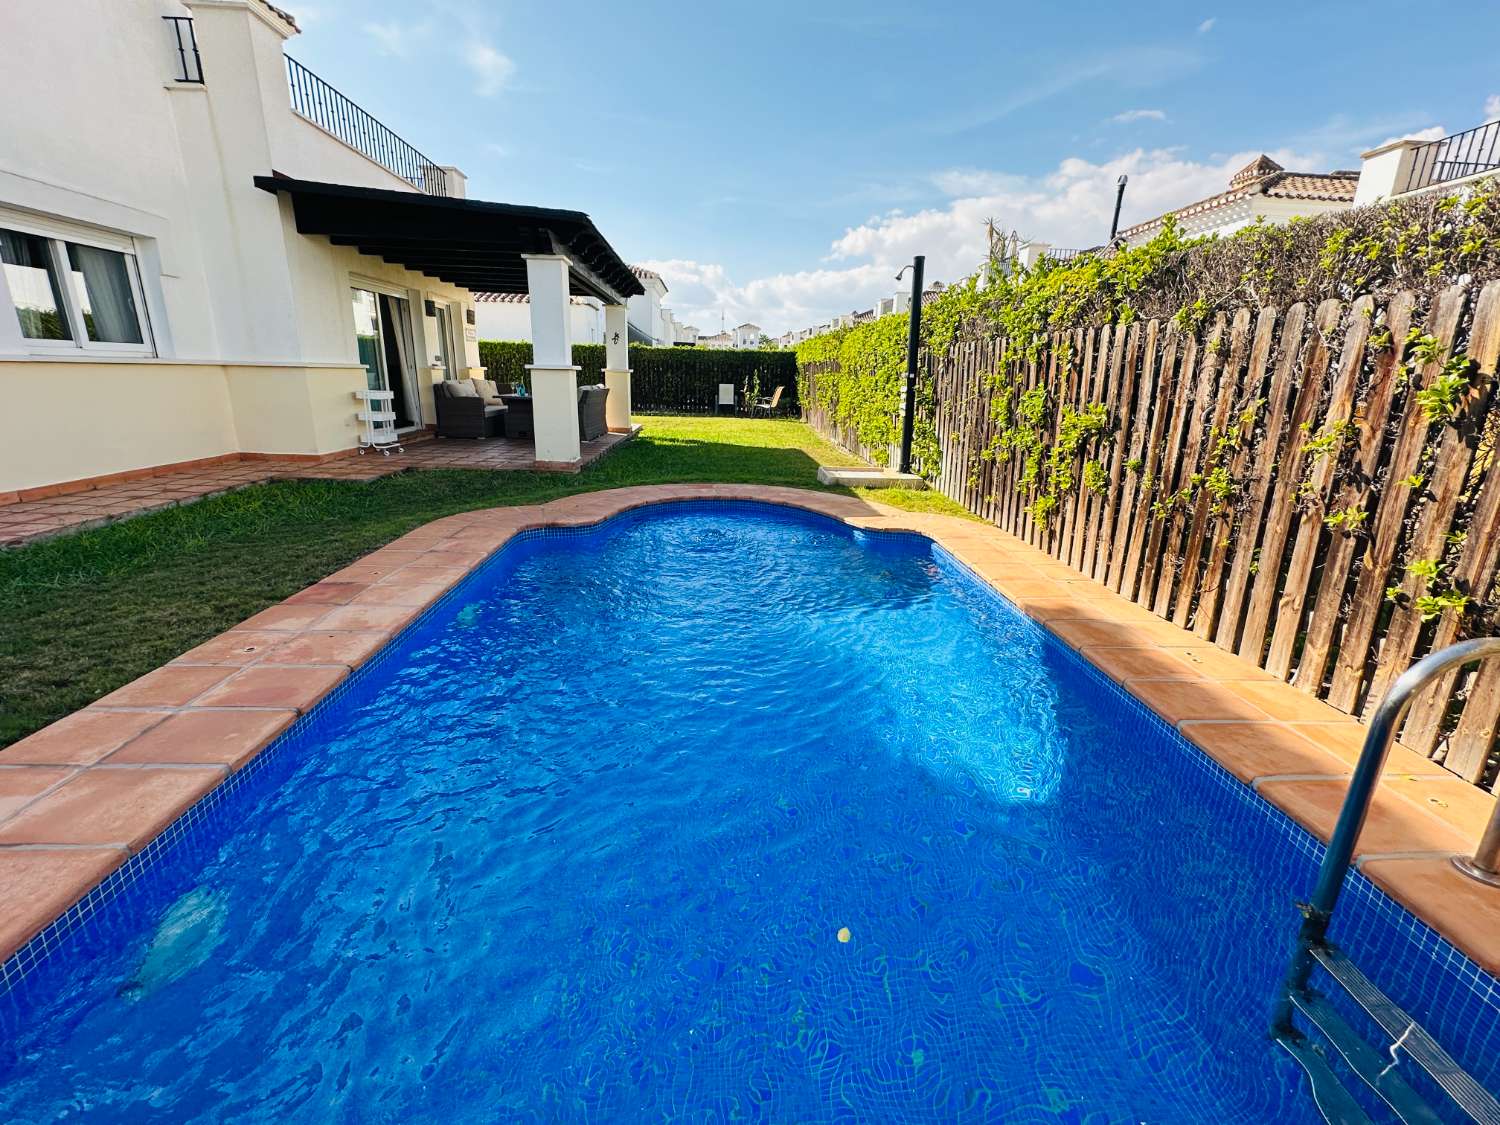 NOW YOU CAN PURCHASE THIS WONDERFUL VILLA WITH PRIVATE POOL IN LA TORRE GOLF RESORT